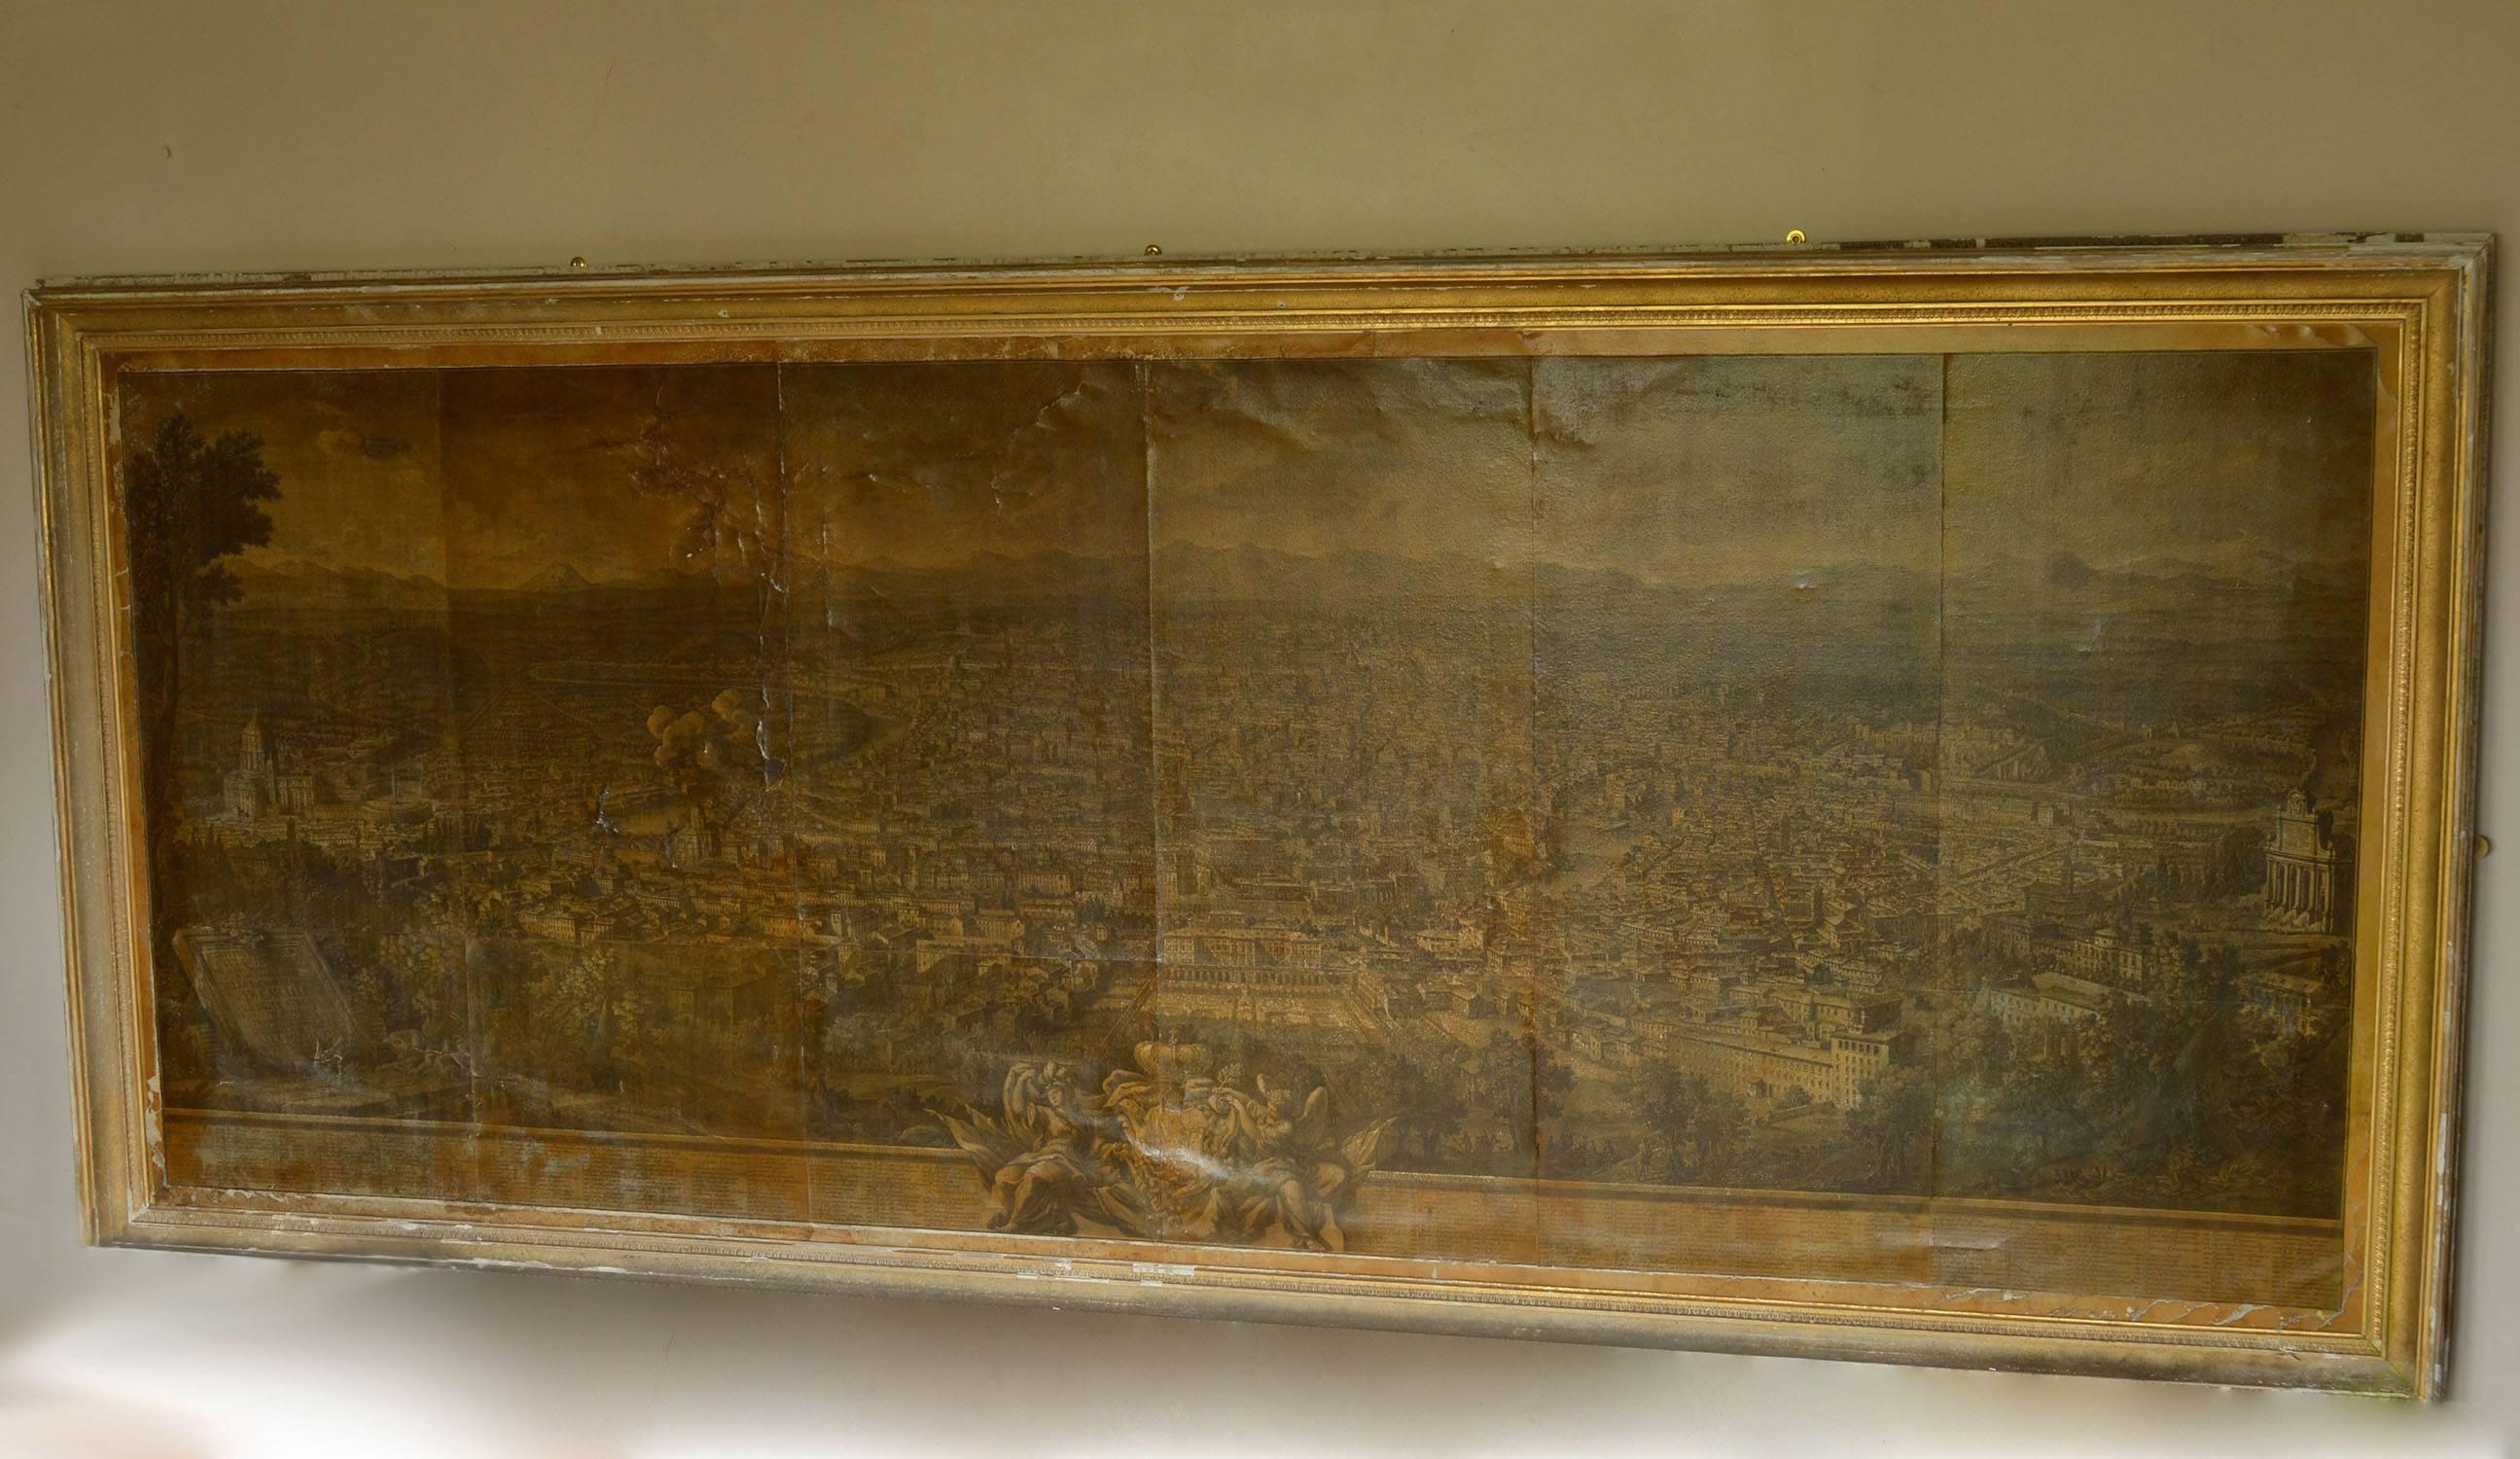 An amazing large-scale panorama of Rome.

Sensational sepia color. It has the look of distressed painted leather screen.

I particularly like the figural cartouche

It is a copper-plate engraving on 12 sheets of paper applied to canvas. It has a